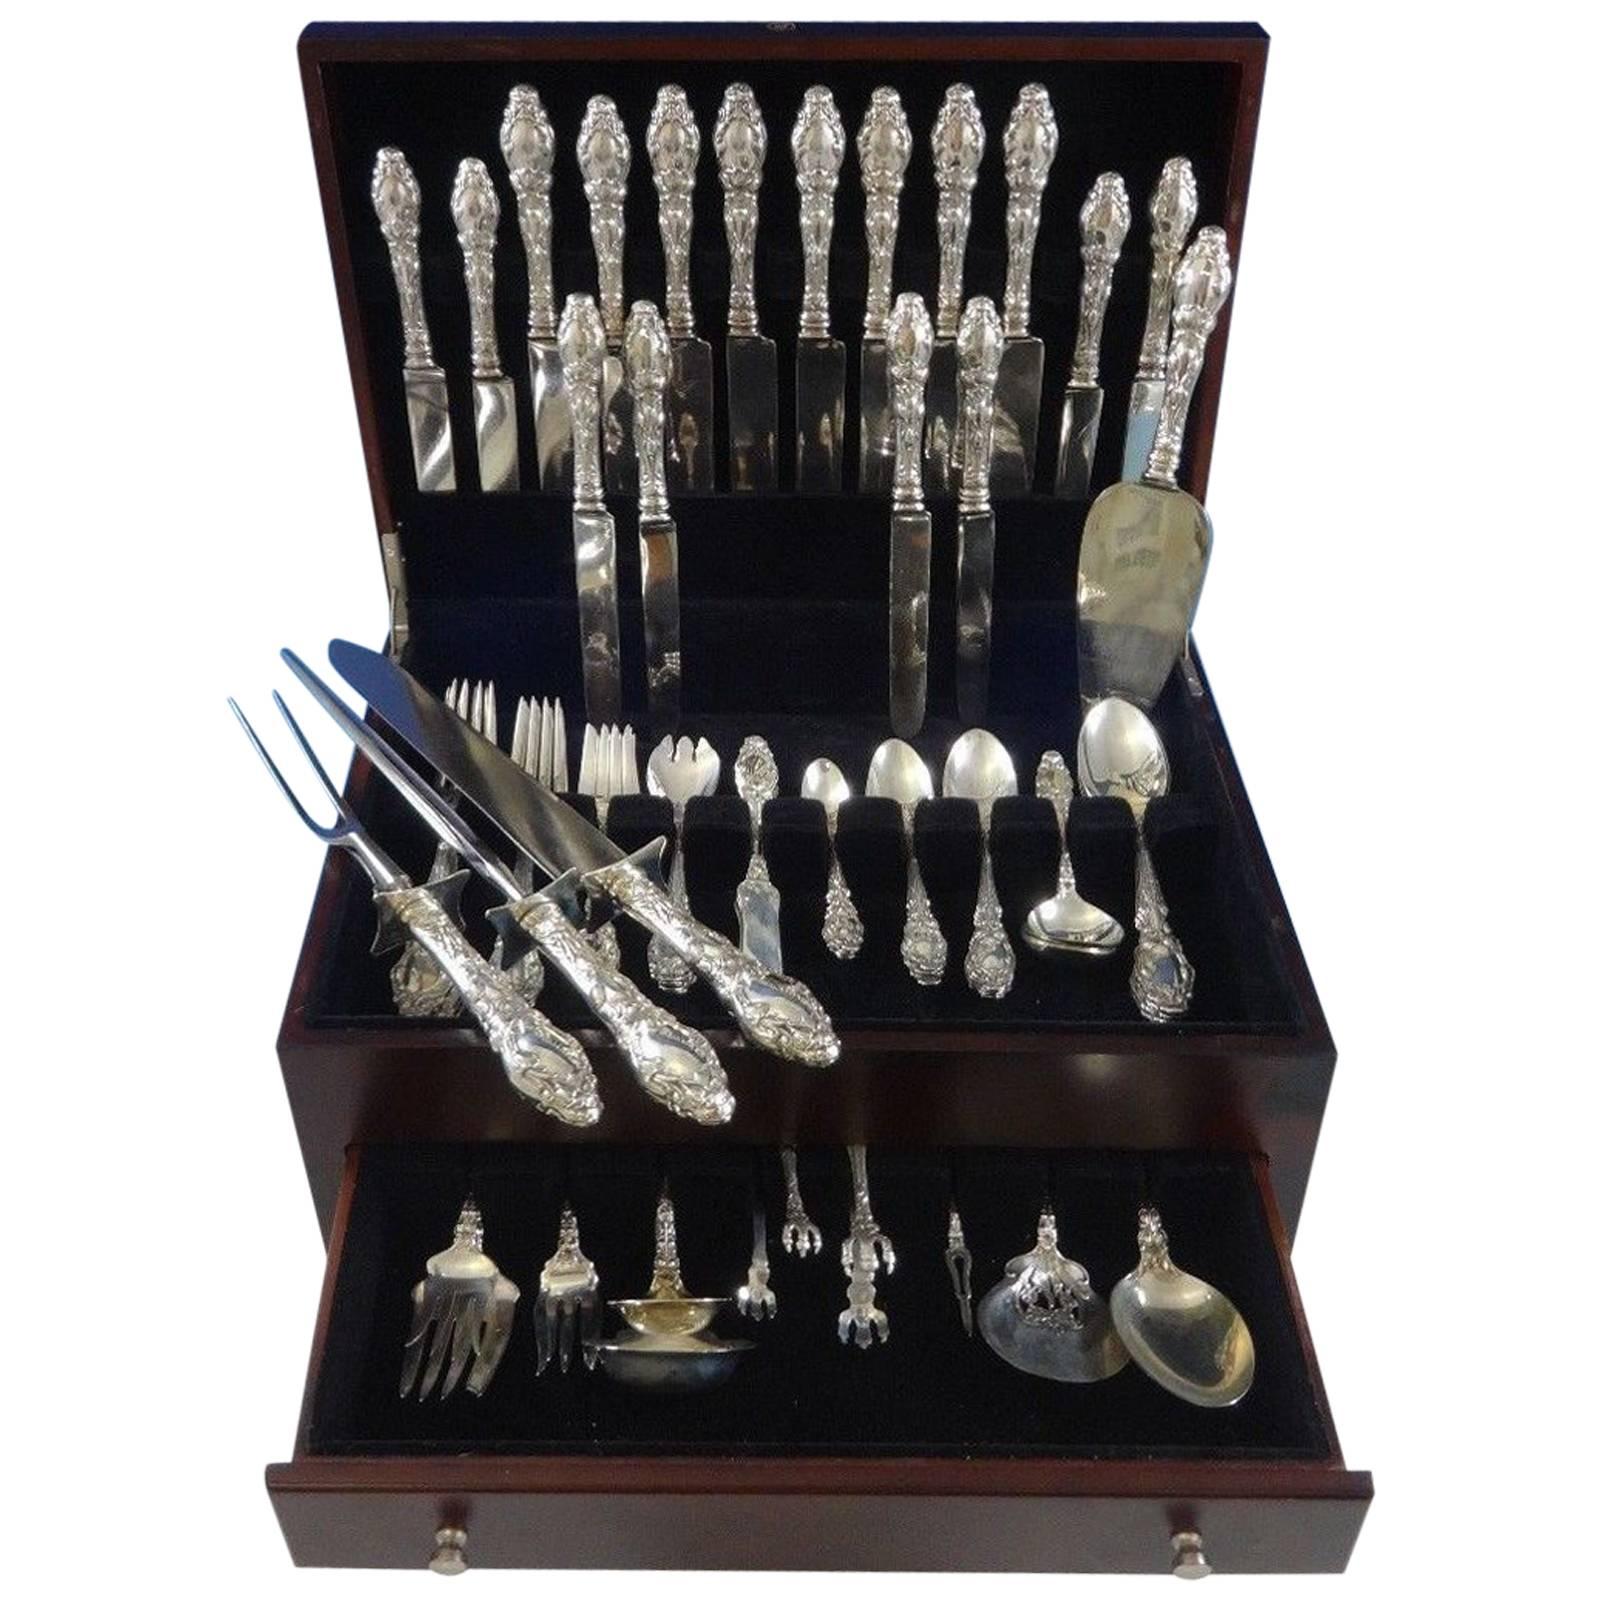 Beautiful Art Nouveau Virginiana by Gorham (circa 1905) sterling silver dinner and Luncheon flatware set - 111 pieces. This set is crisp and has no monogram (which is rare for this pattern). This set includes: Eight dinner size knives, 9 5/8